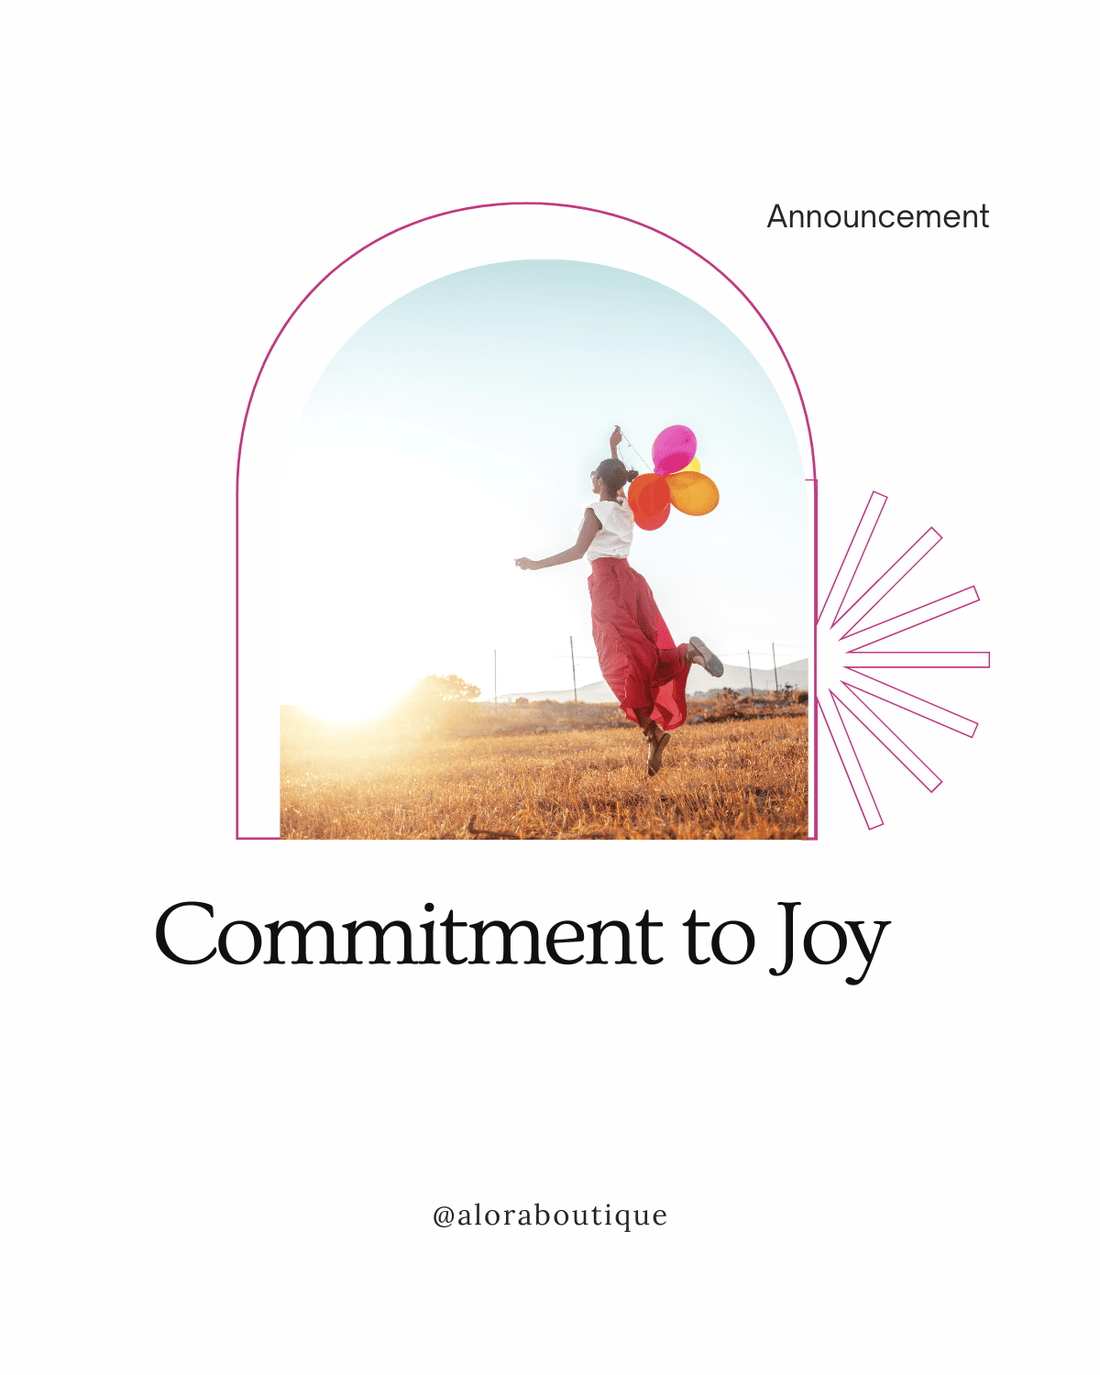 Alora: Committed to Sparking Joy - Alora Boutique